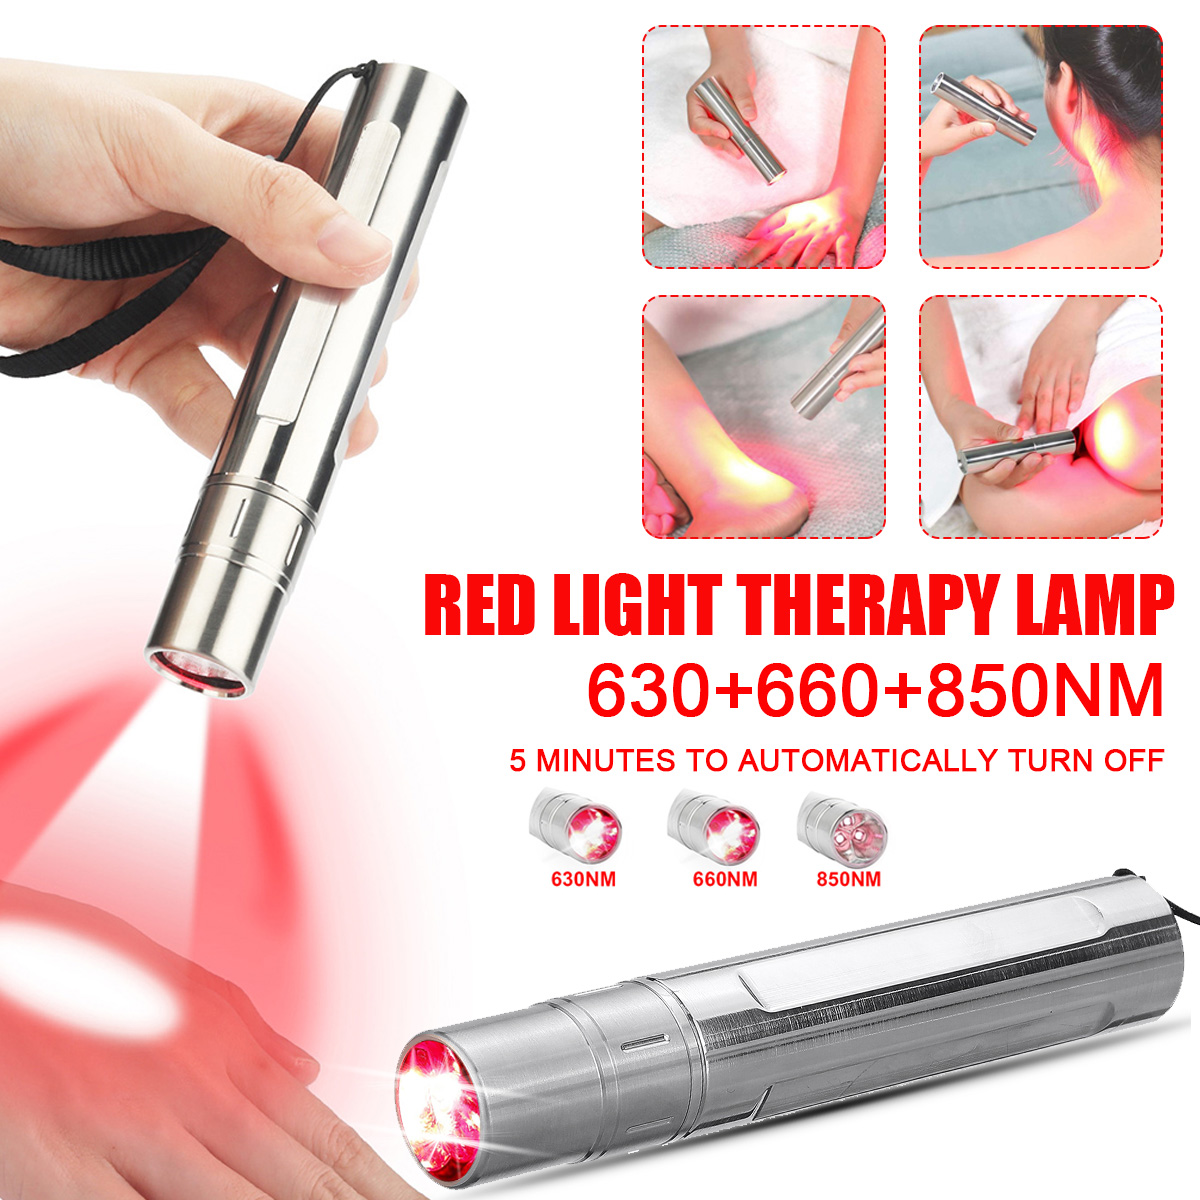 630NM-660NM-850NM-USB-Rechargeable-Red-Light-Therapy-Lamp-Infrared-Light-to-Relieve-Joint-Muscle-Pai-1934523-1